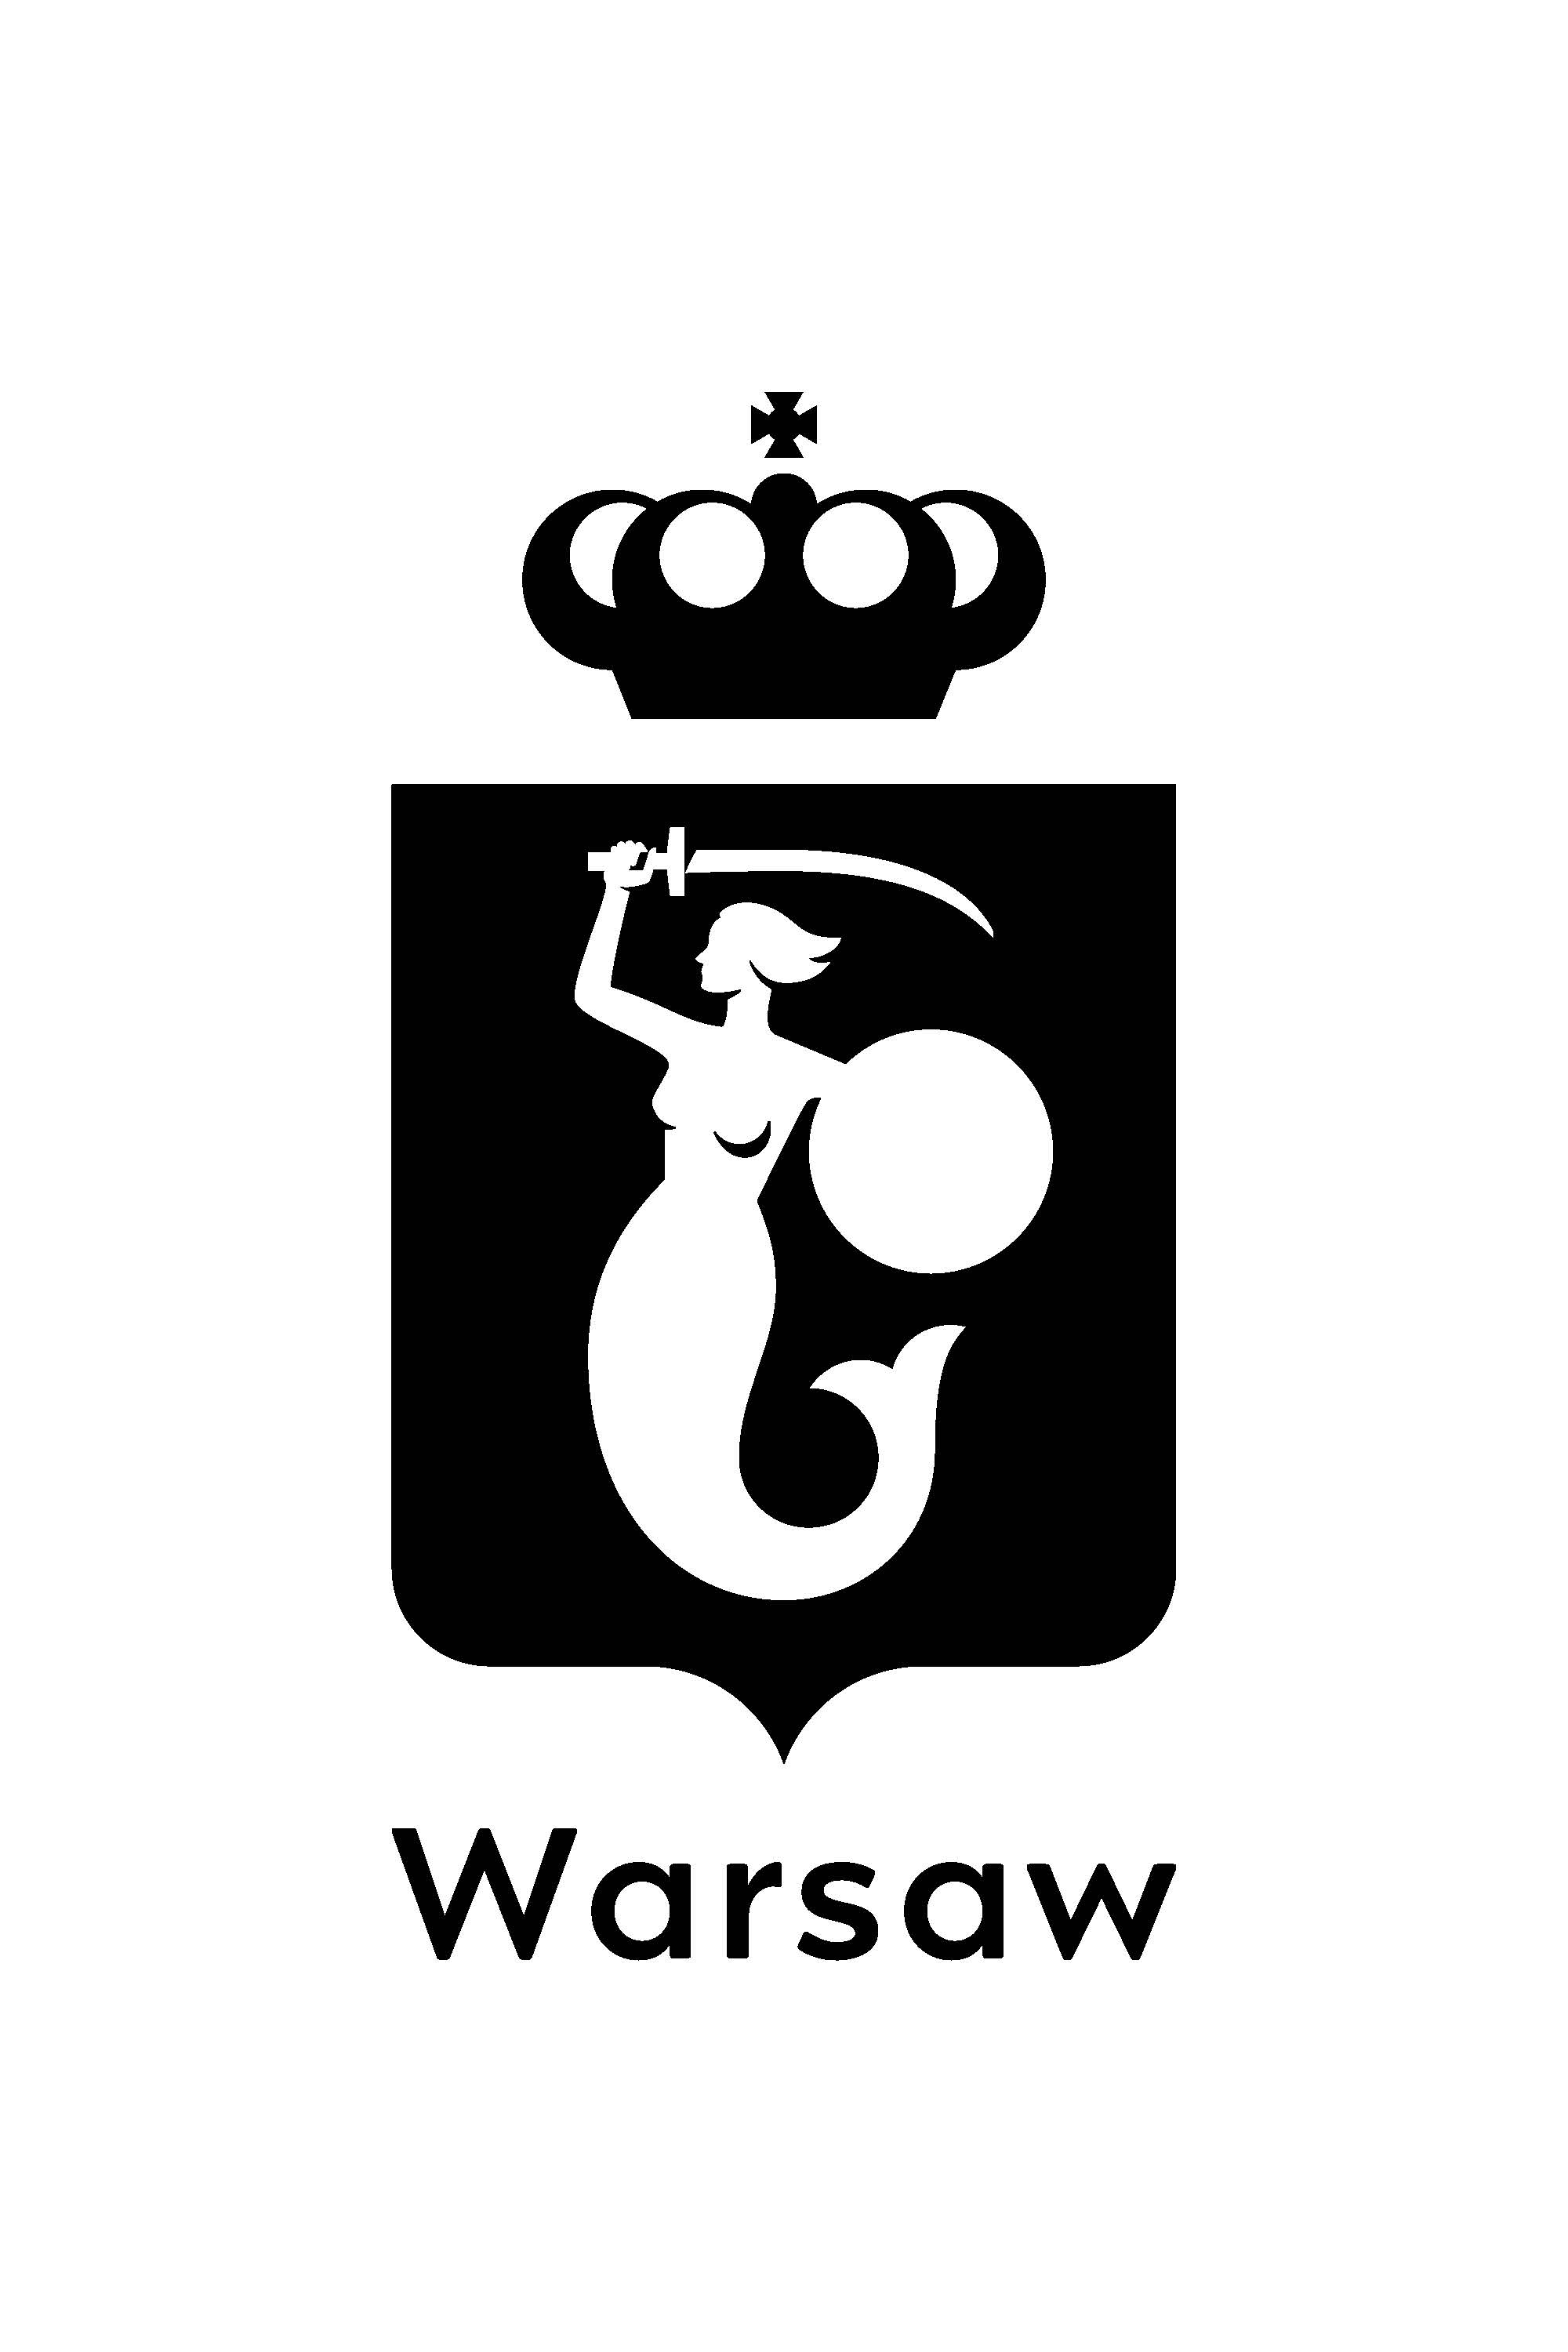 The Capital City of Warsaw